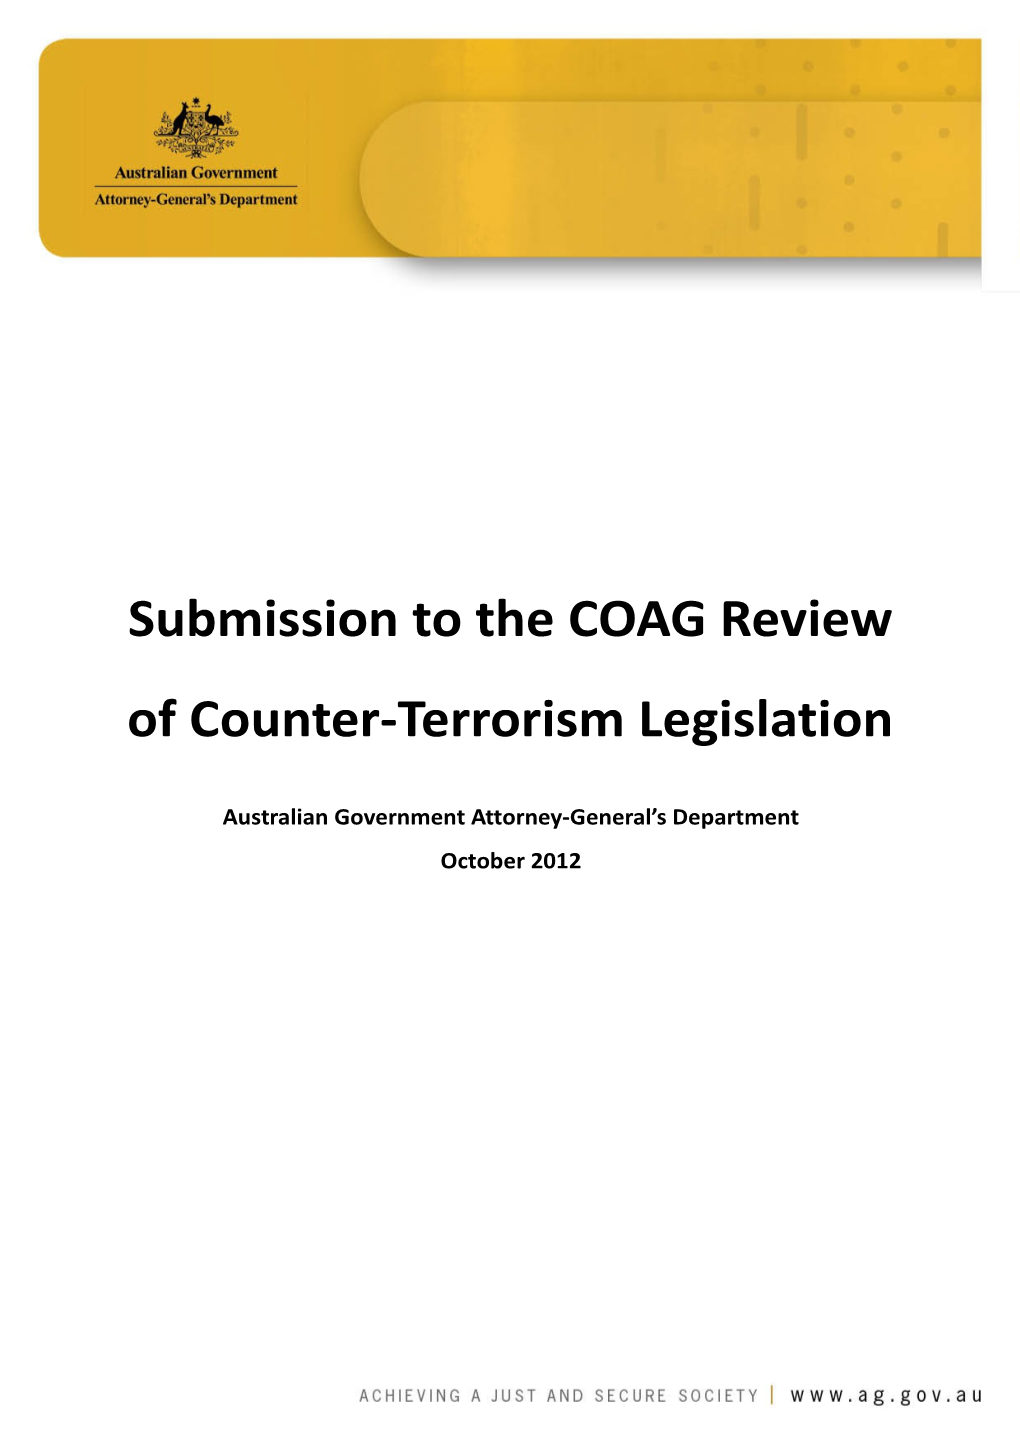 Submission to the COAG Review of Counter-Terrorism Legislation